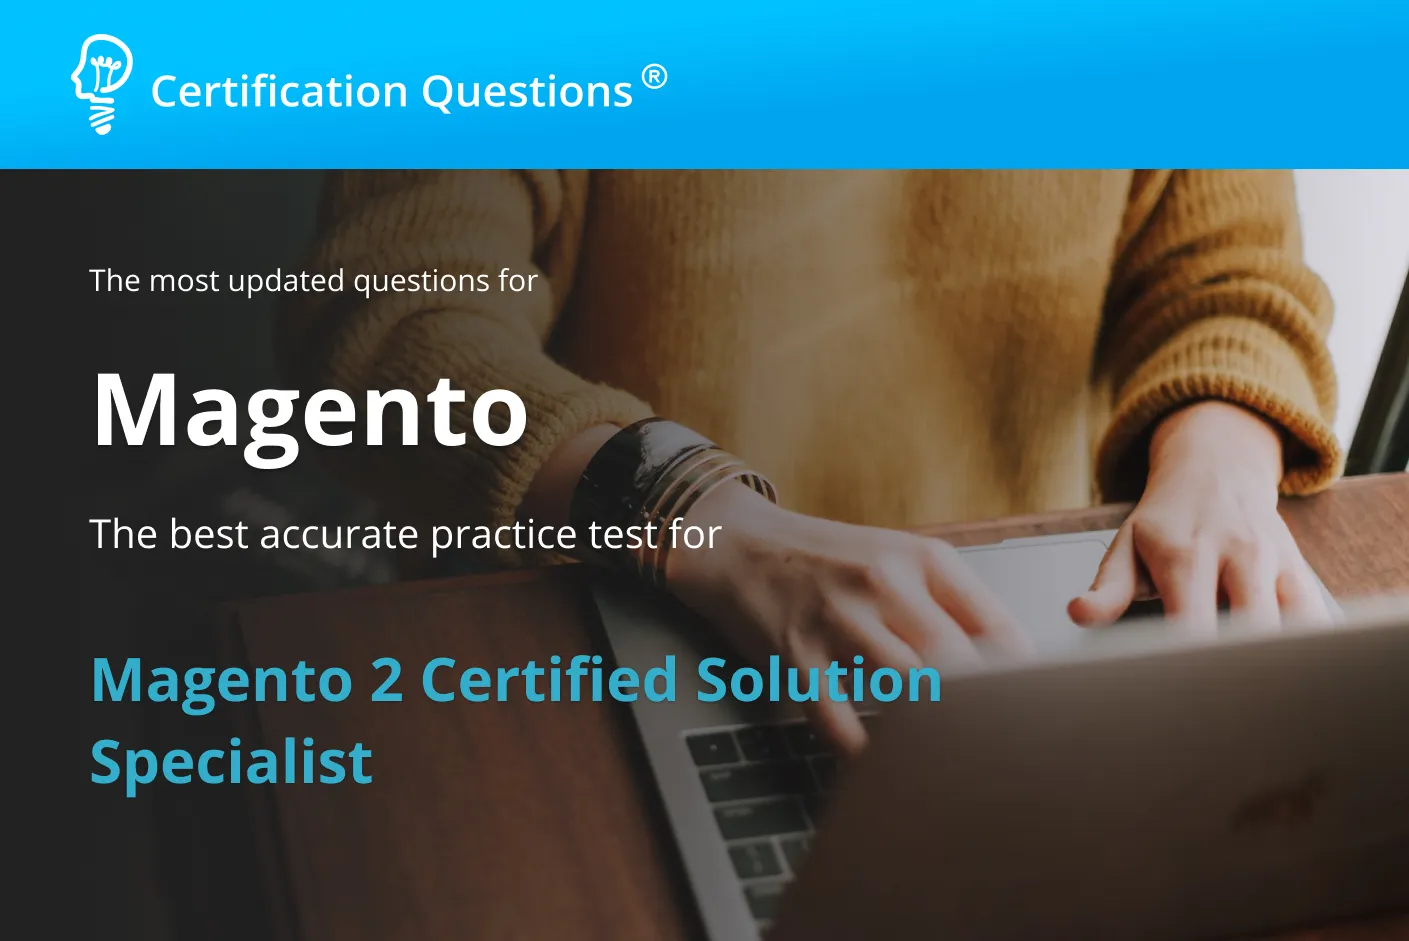 This image represents the magento 2 certified solution specialist exam